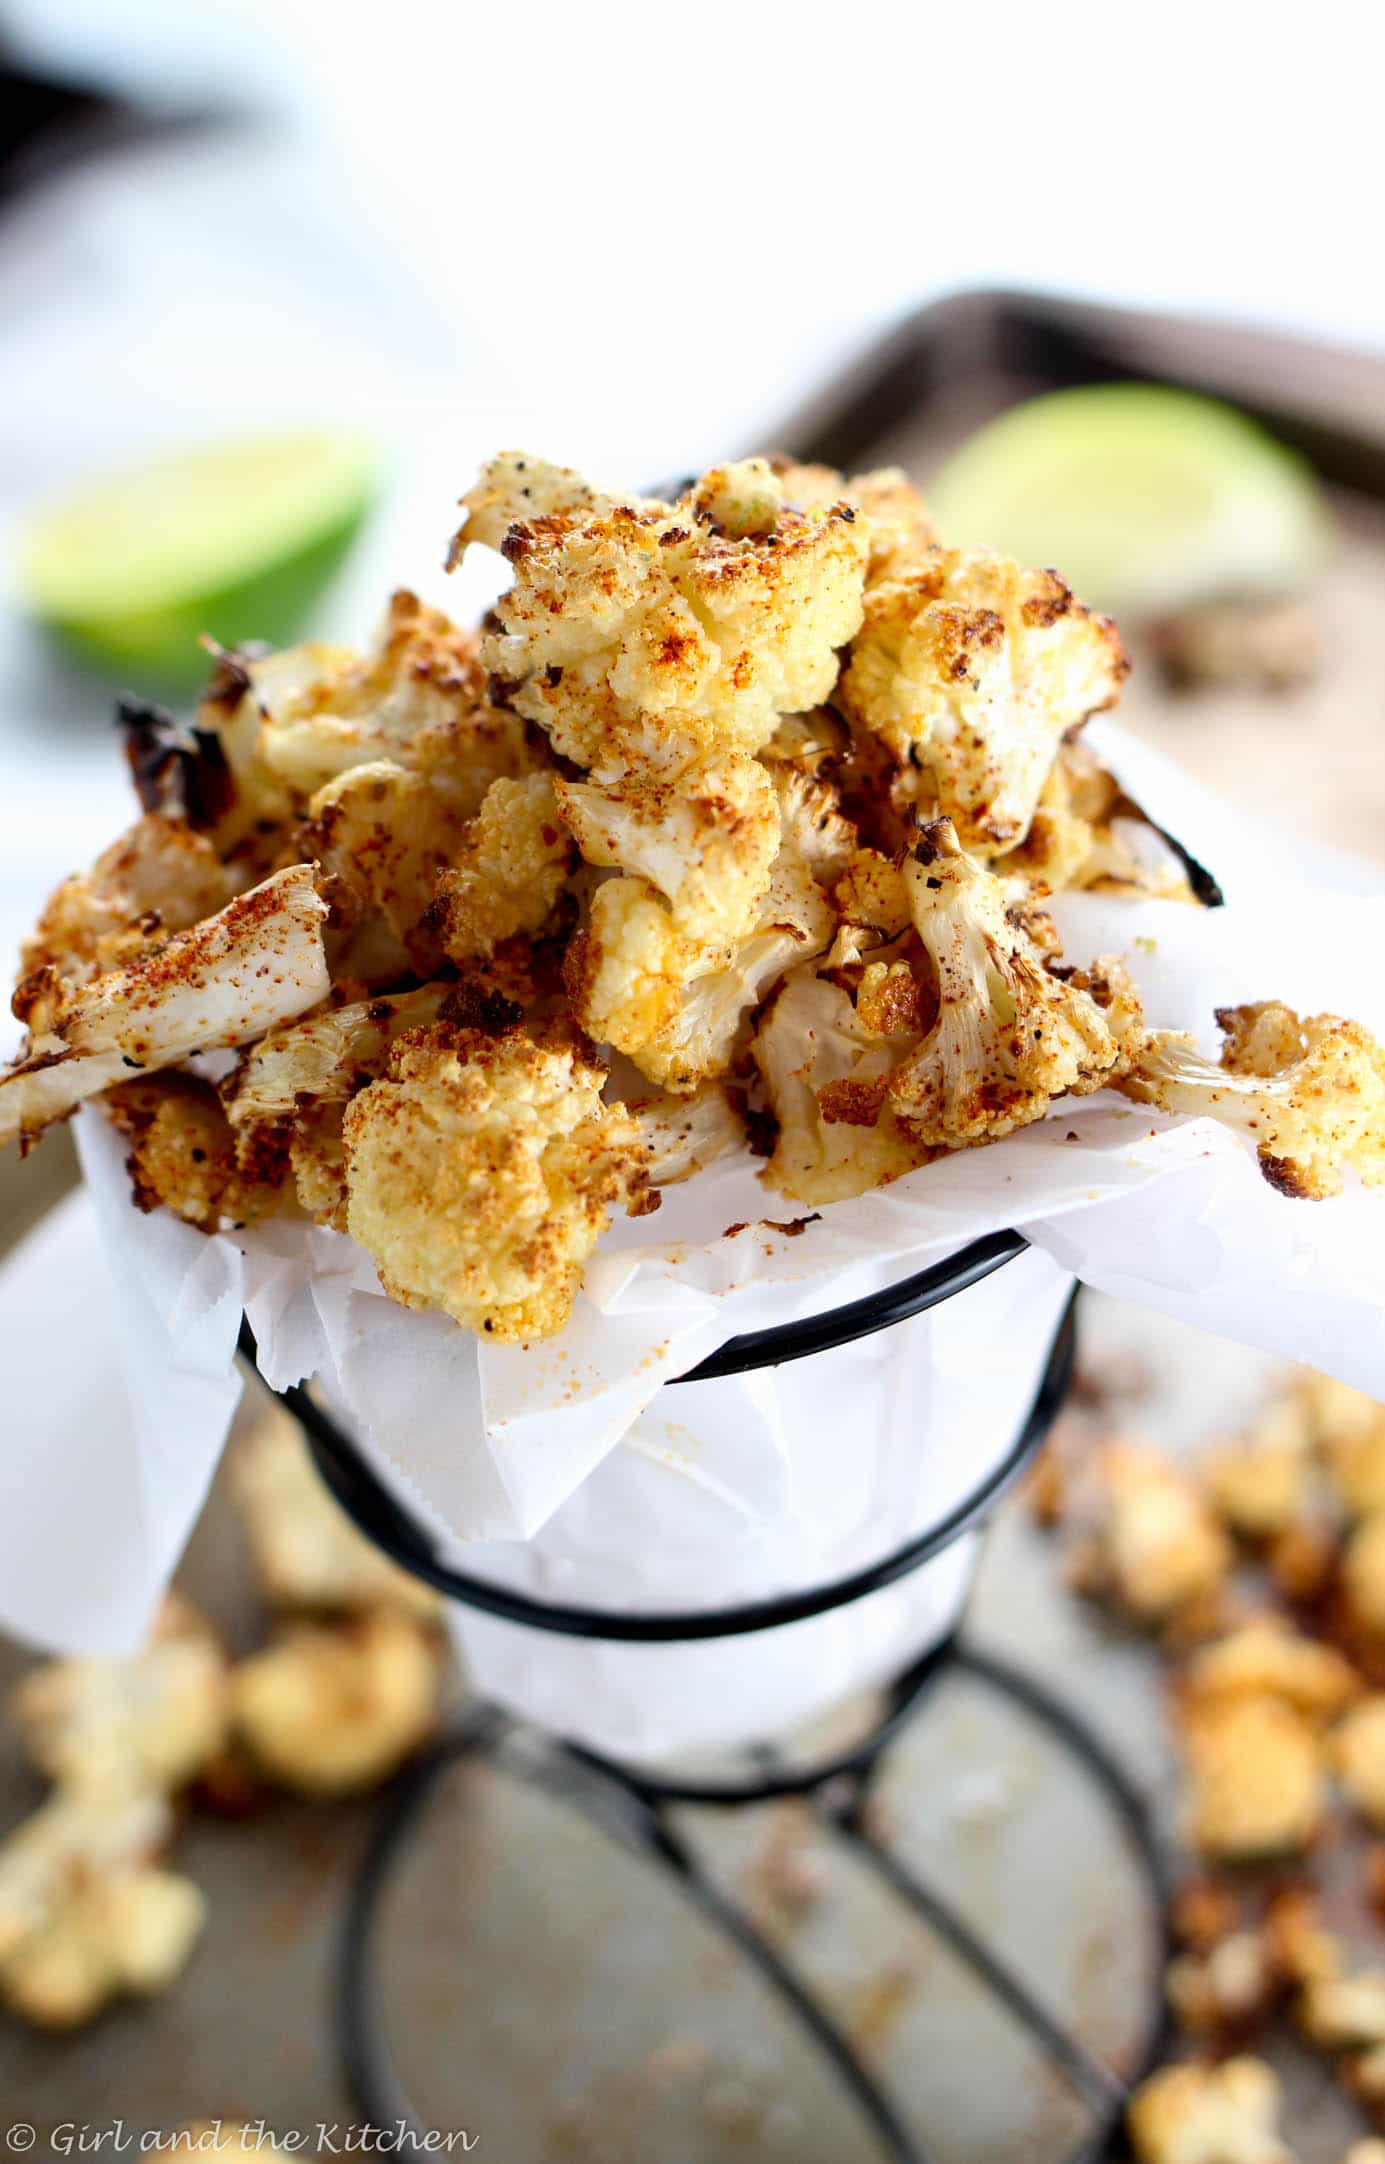 The ultimate movie snack just got healthy! My chili lime oven roasted cauliflower popcorn looks as cute as the original but tastes a heck of a lot better! With subtle citrus notes and a spicy kick this faux popcorn is the perfect couch munch food. All the flavor and none of the guilt=heaven!!!